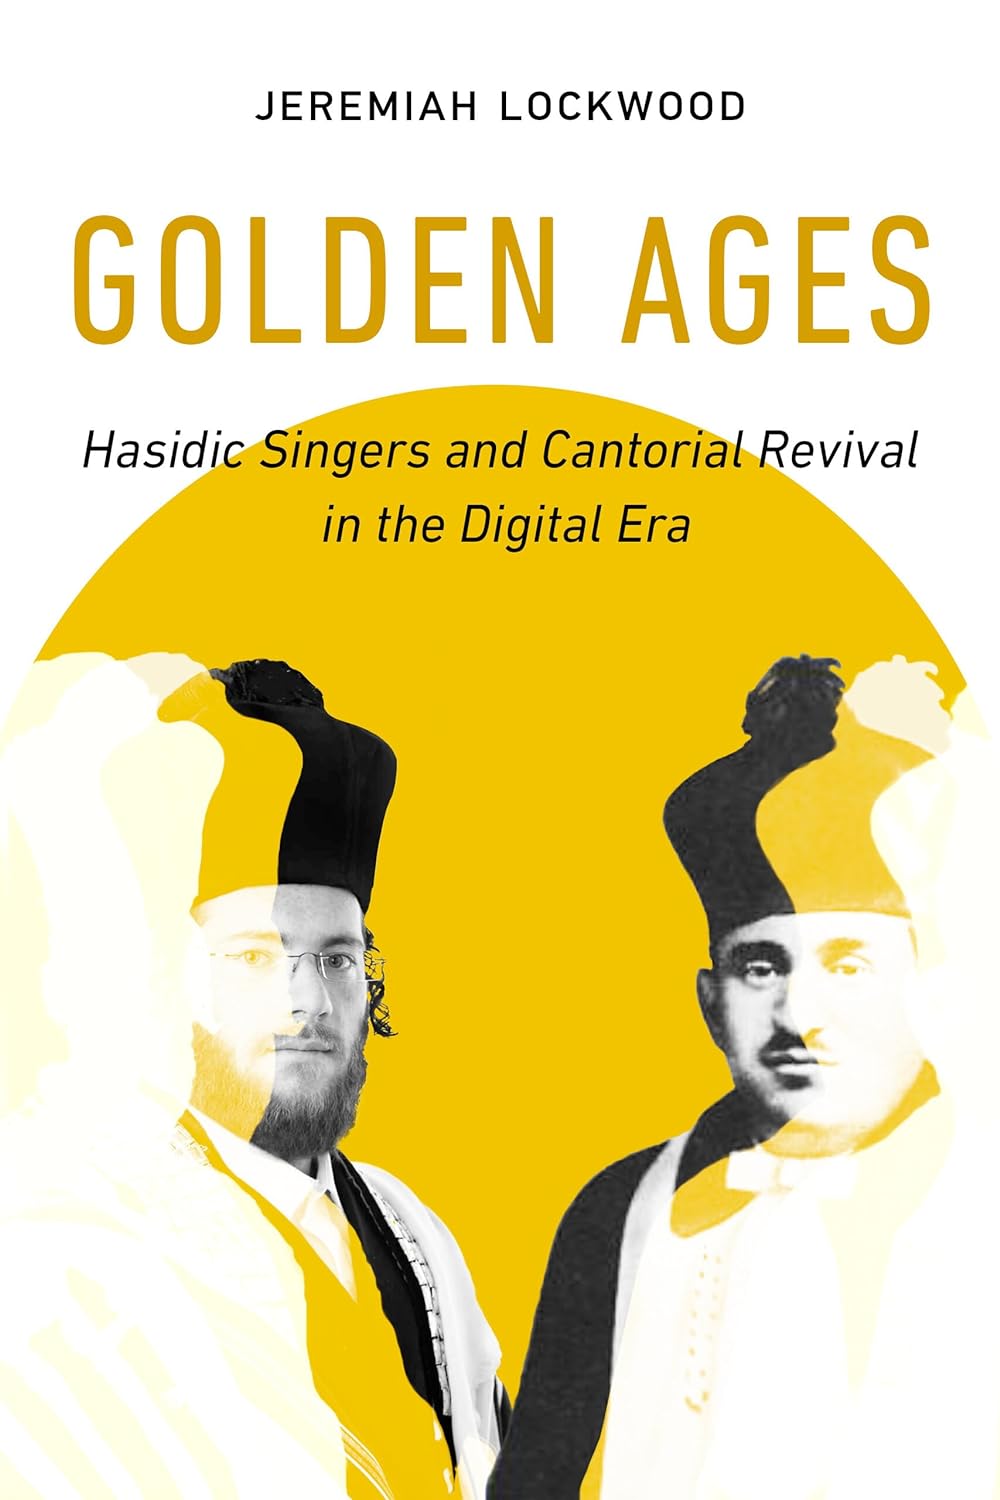 Golden Ages: Hasidic Singers and Cantorial Revival in the Digital Era (Signed Copy)